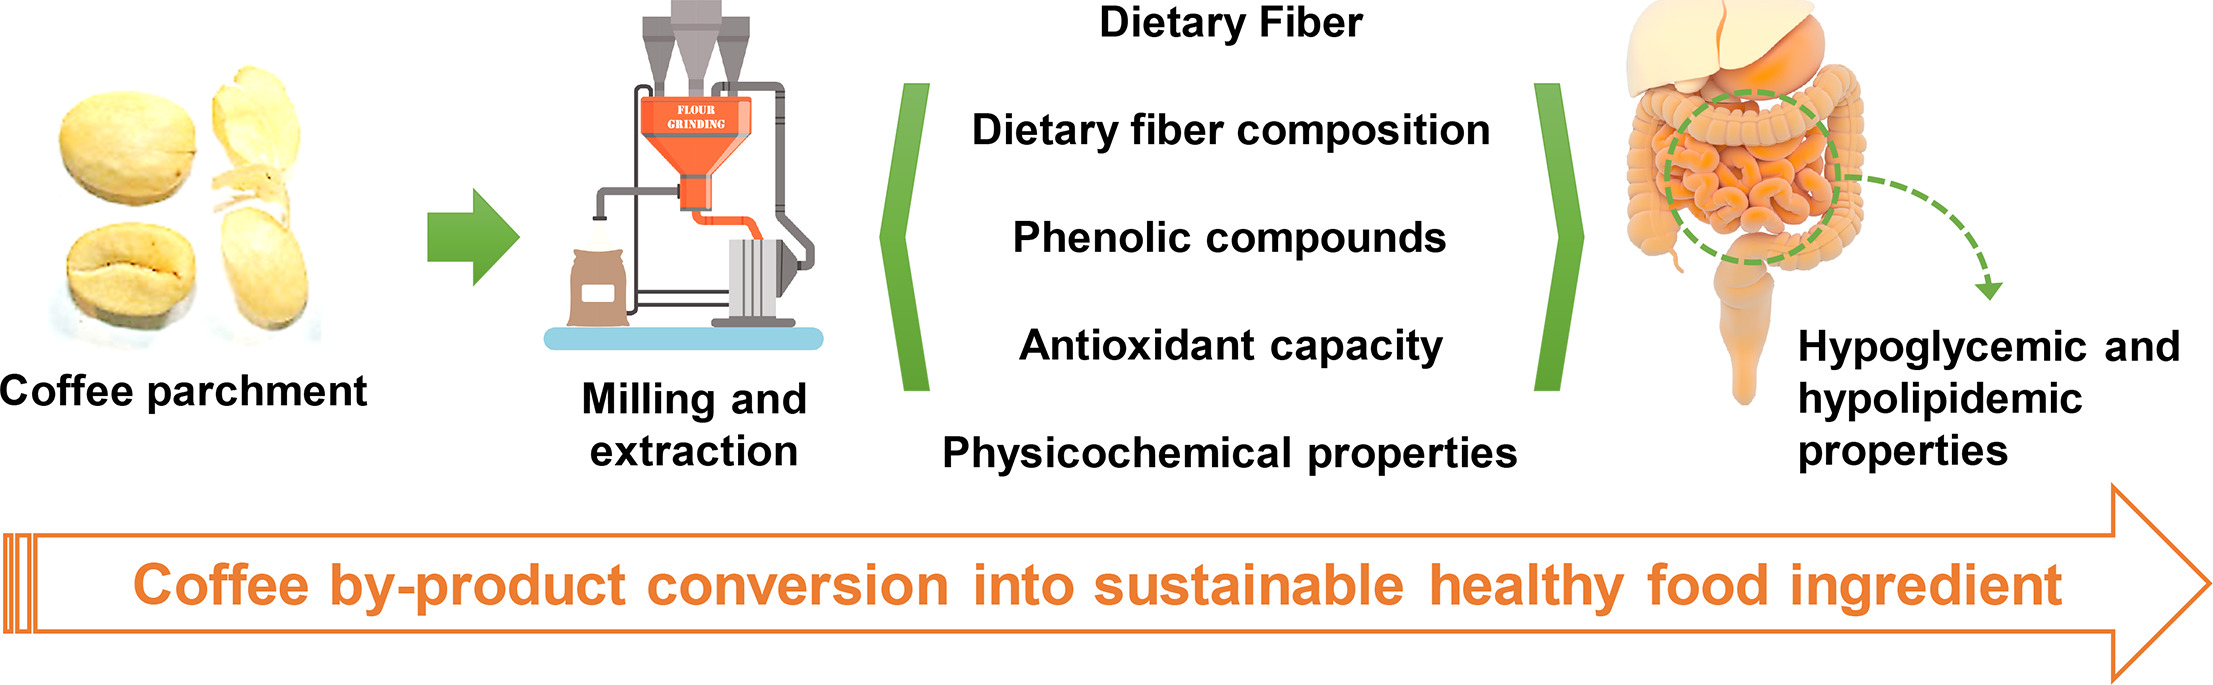 Coffee parchment as a new dietary fiber ingredient: Functional and physiological characterization